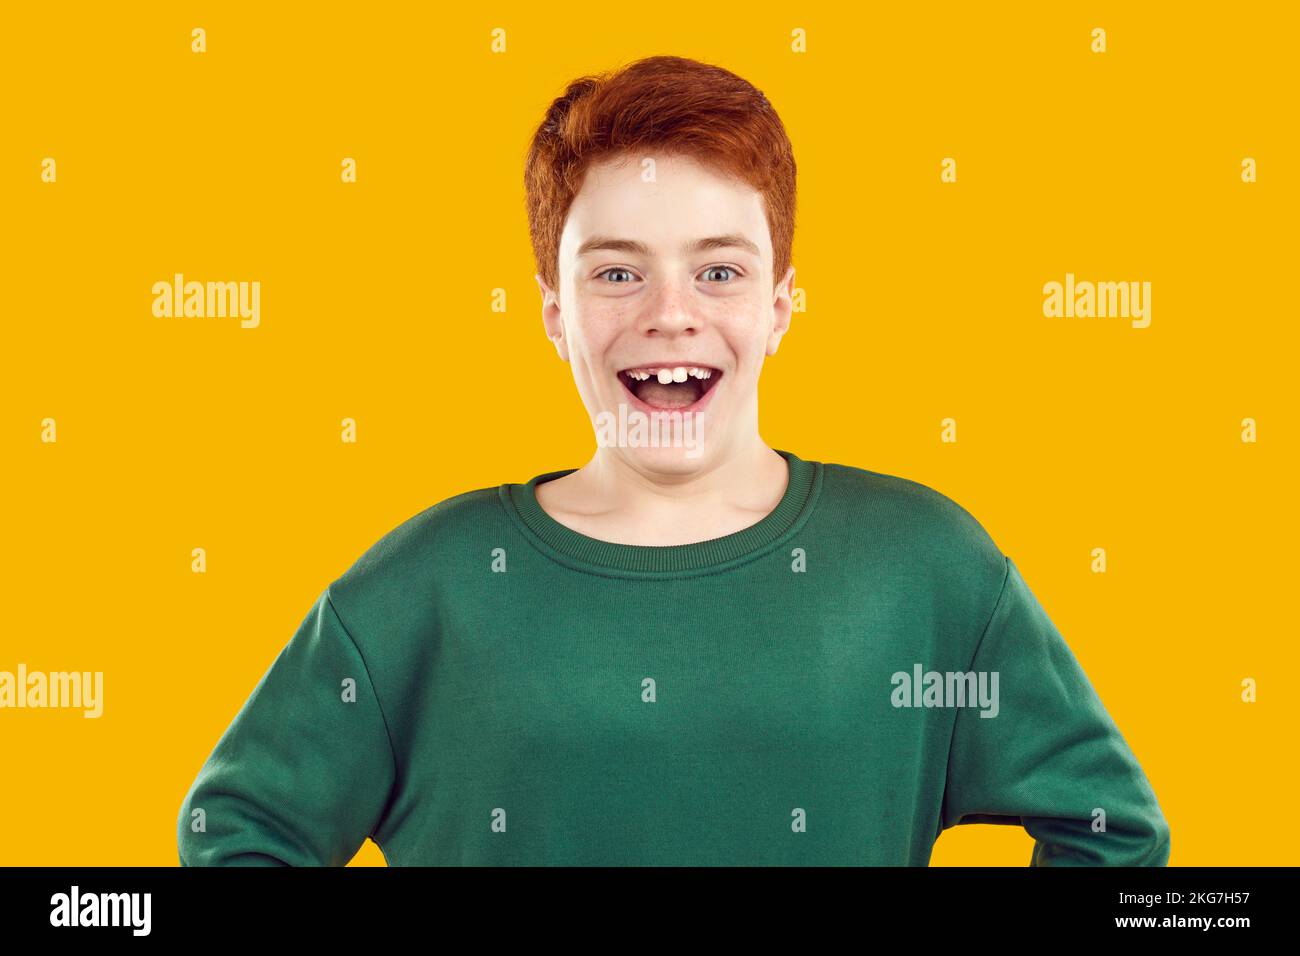 Portrait of cheerful preteen boy who laughs funny showing smile with crooked teeth. Stock Photo